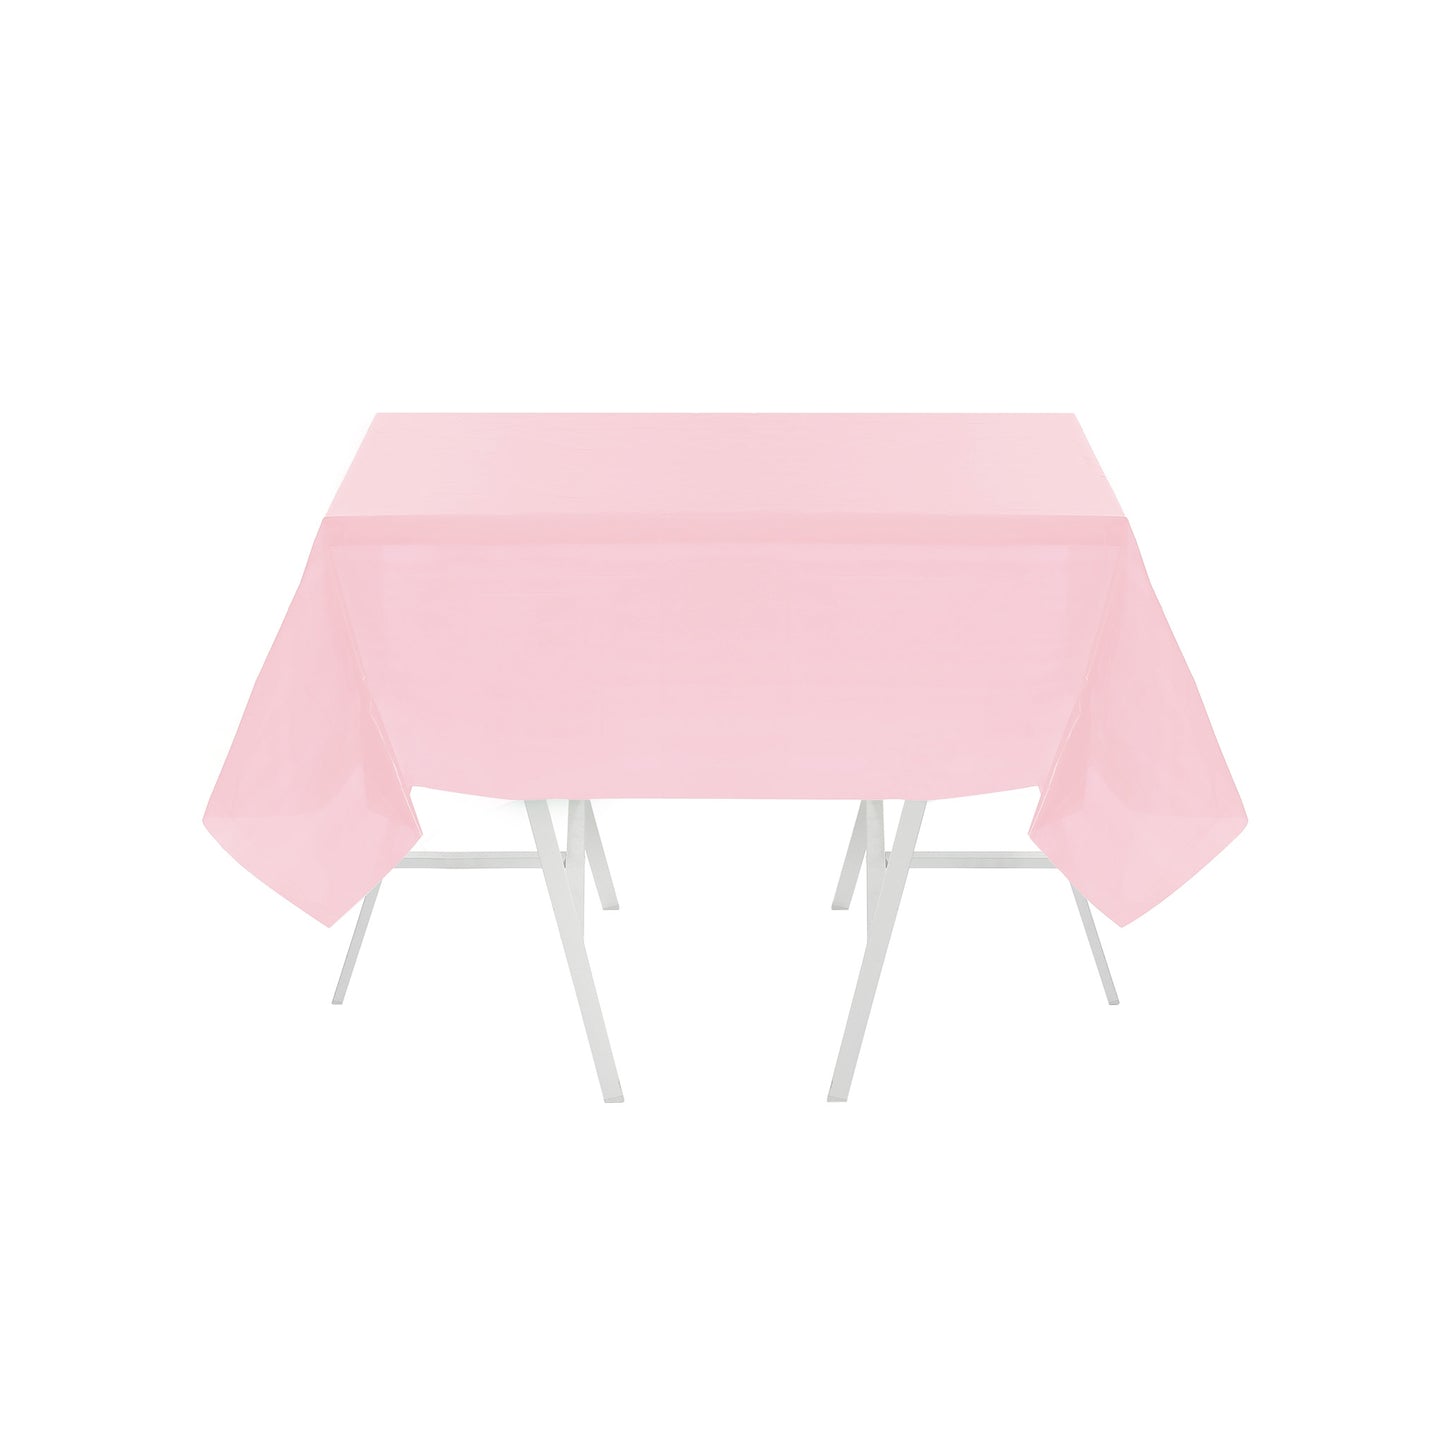 PINK PVC DISPOSABLE TABLE COVER